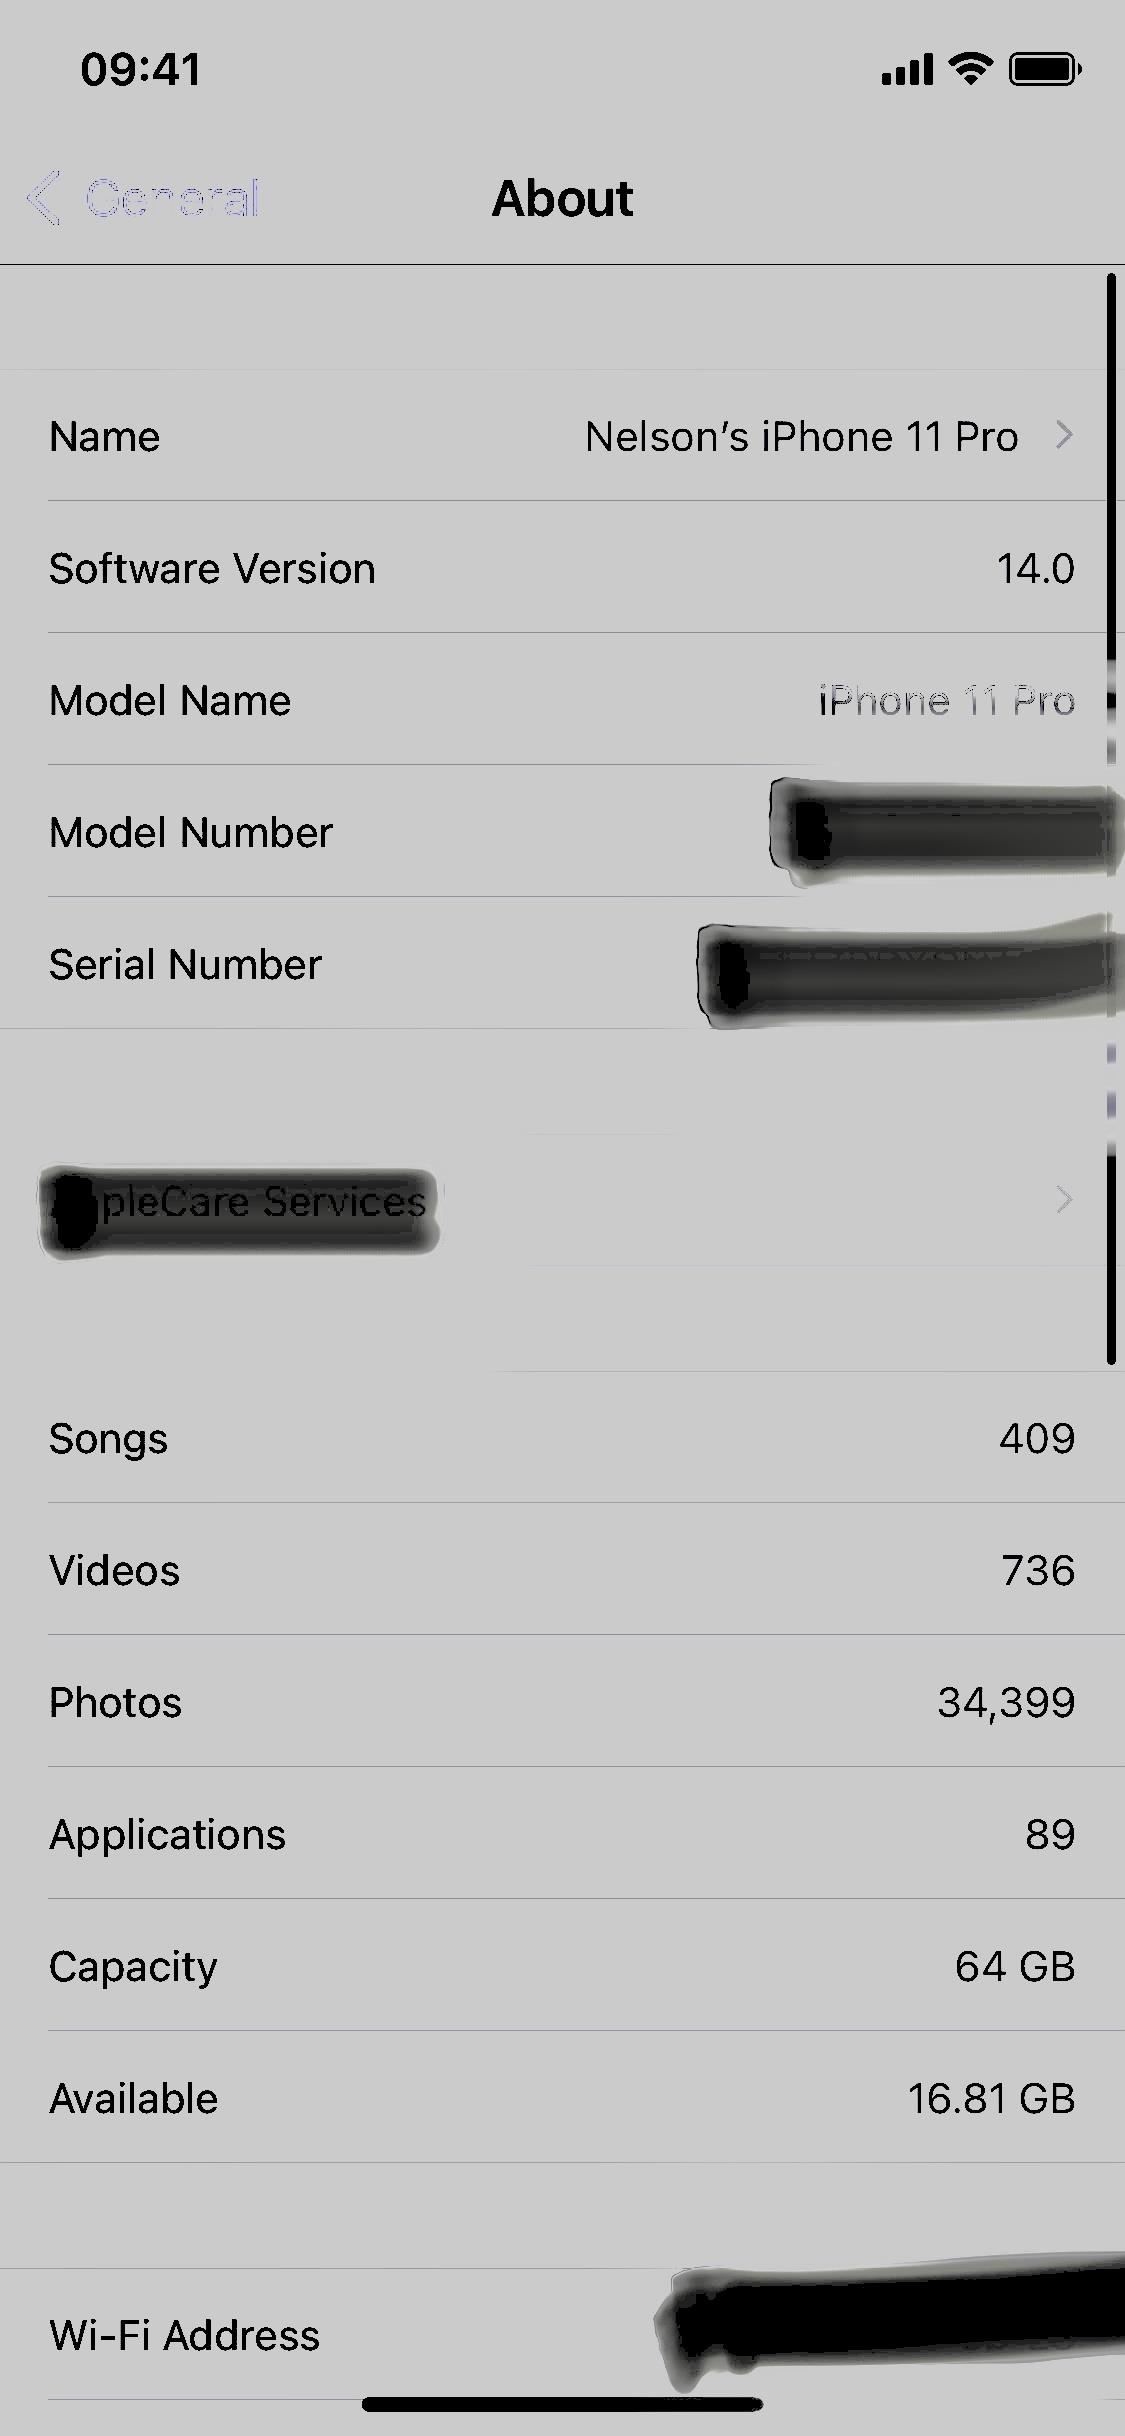 Warning: Sensitive Info You Black Out in Images Can Be Revealed with a Few Quick Edits on Your iPhone